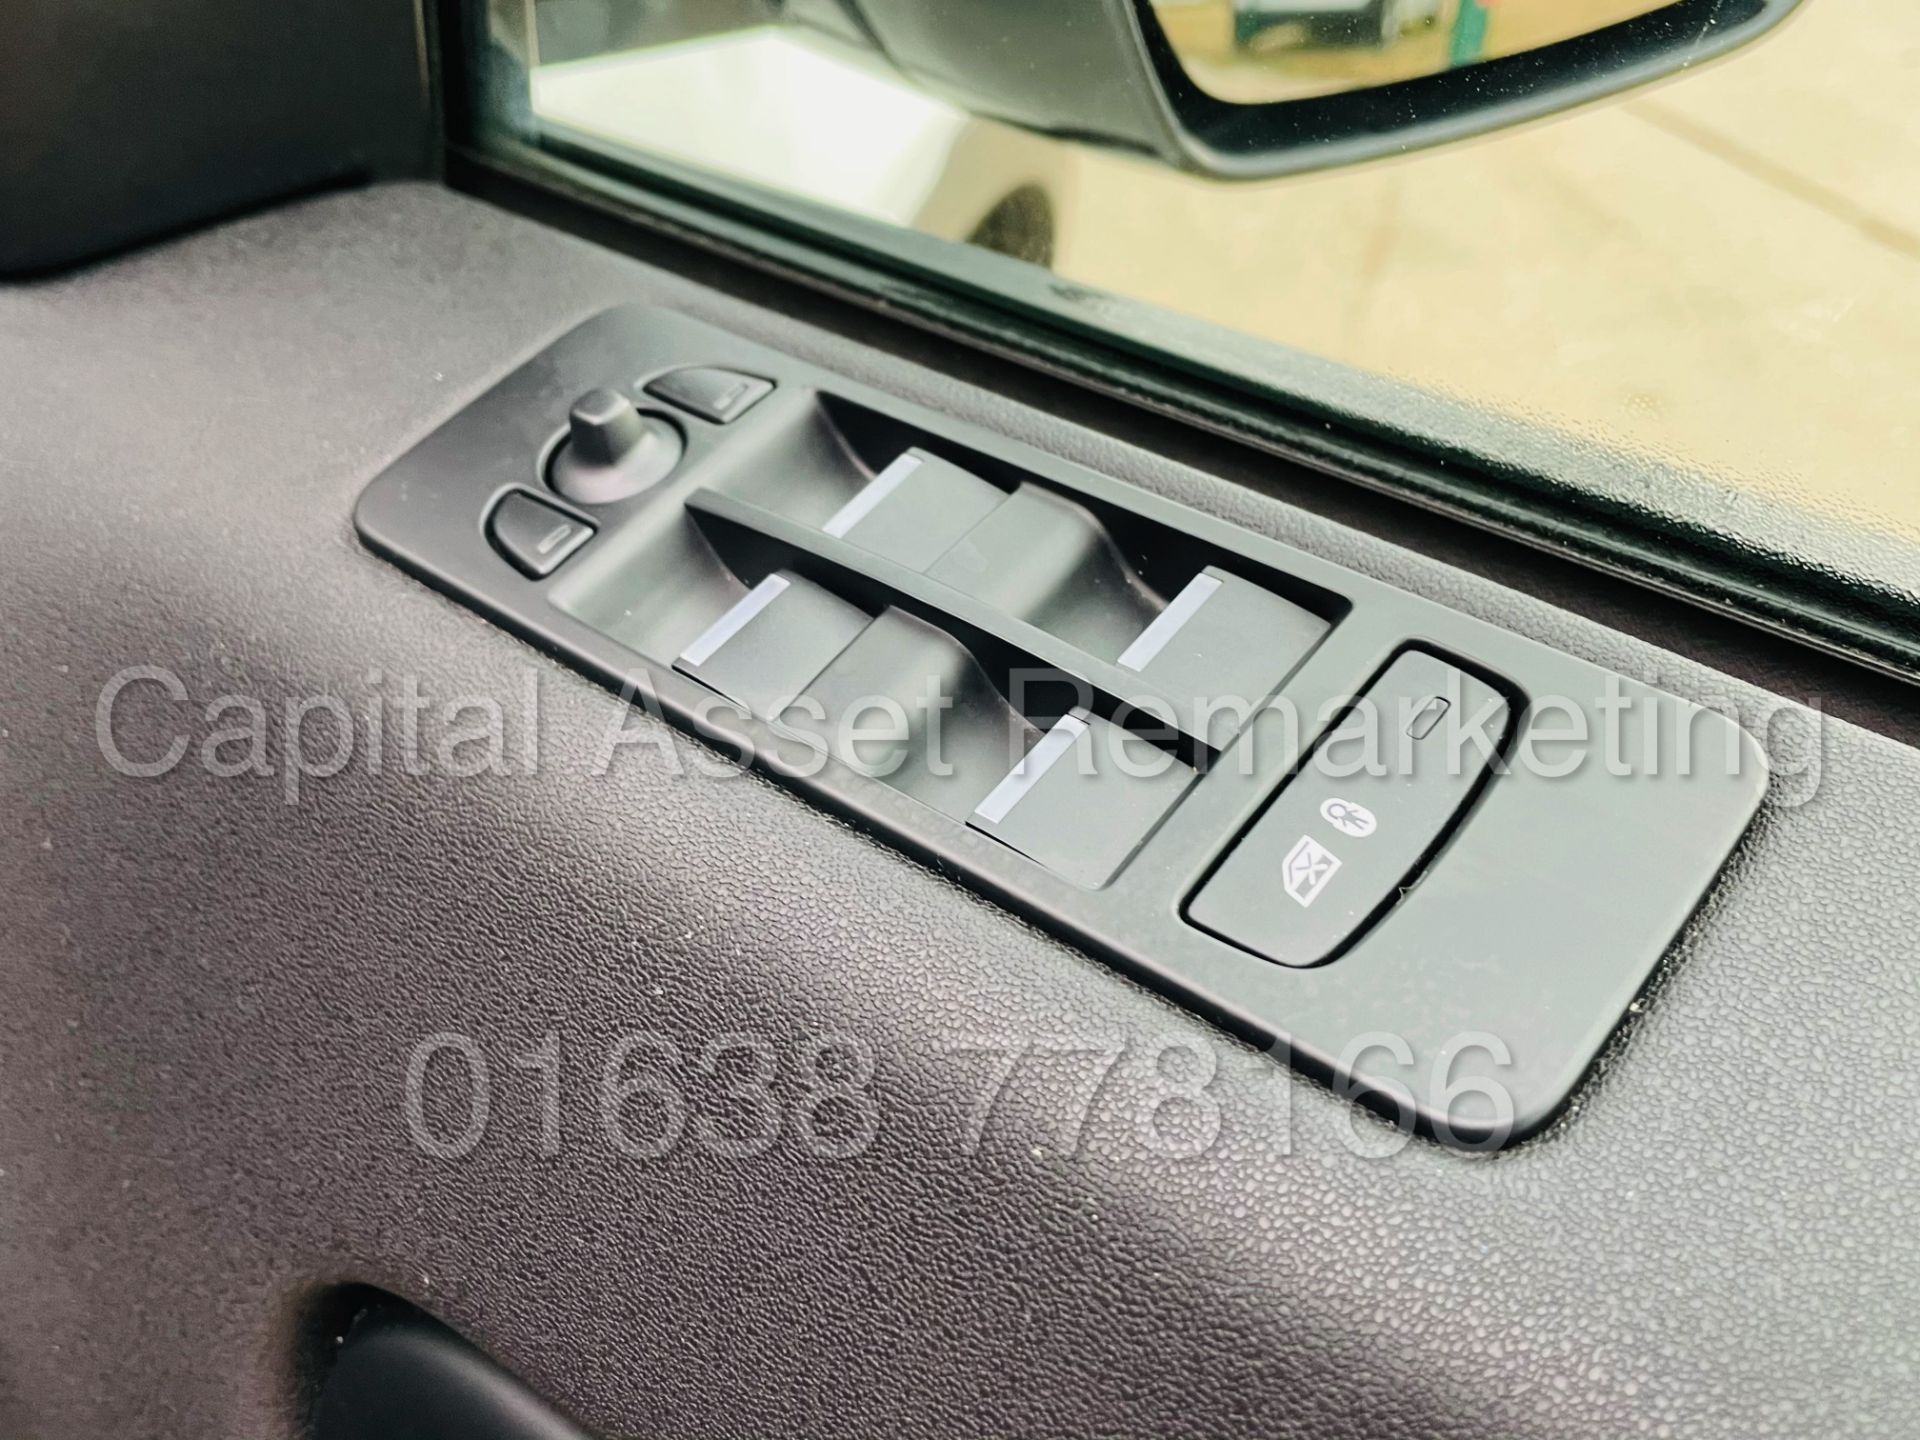 On Sale LAND ROVER DISCOVERY SPORT *SPECIAL EDITION* SUV (2018) '2.0 TD4 - STOP/START' - Image 34 of 48